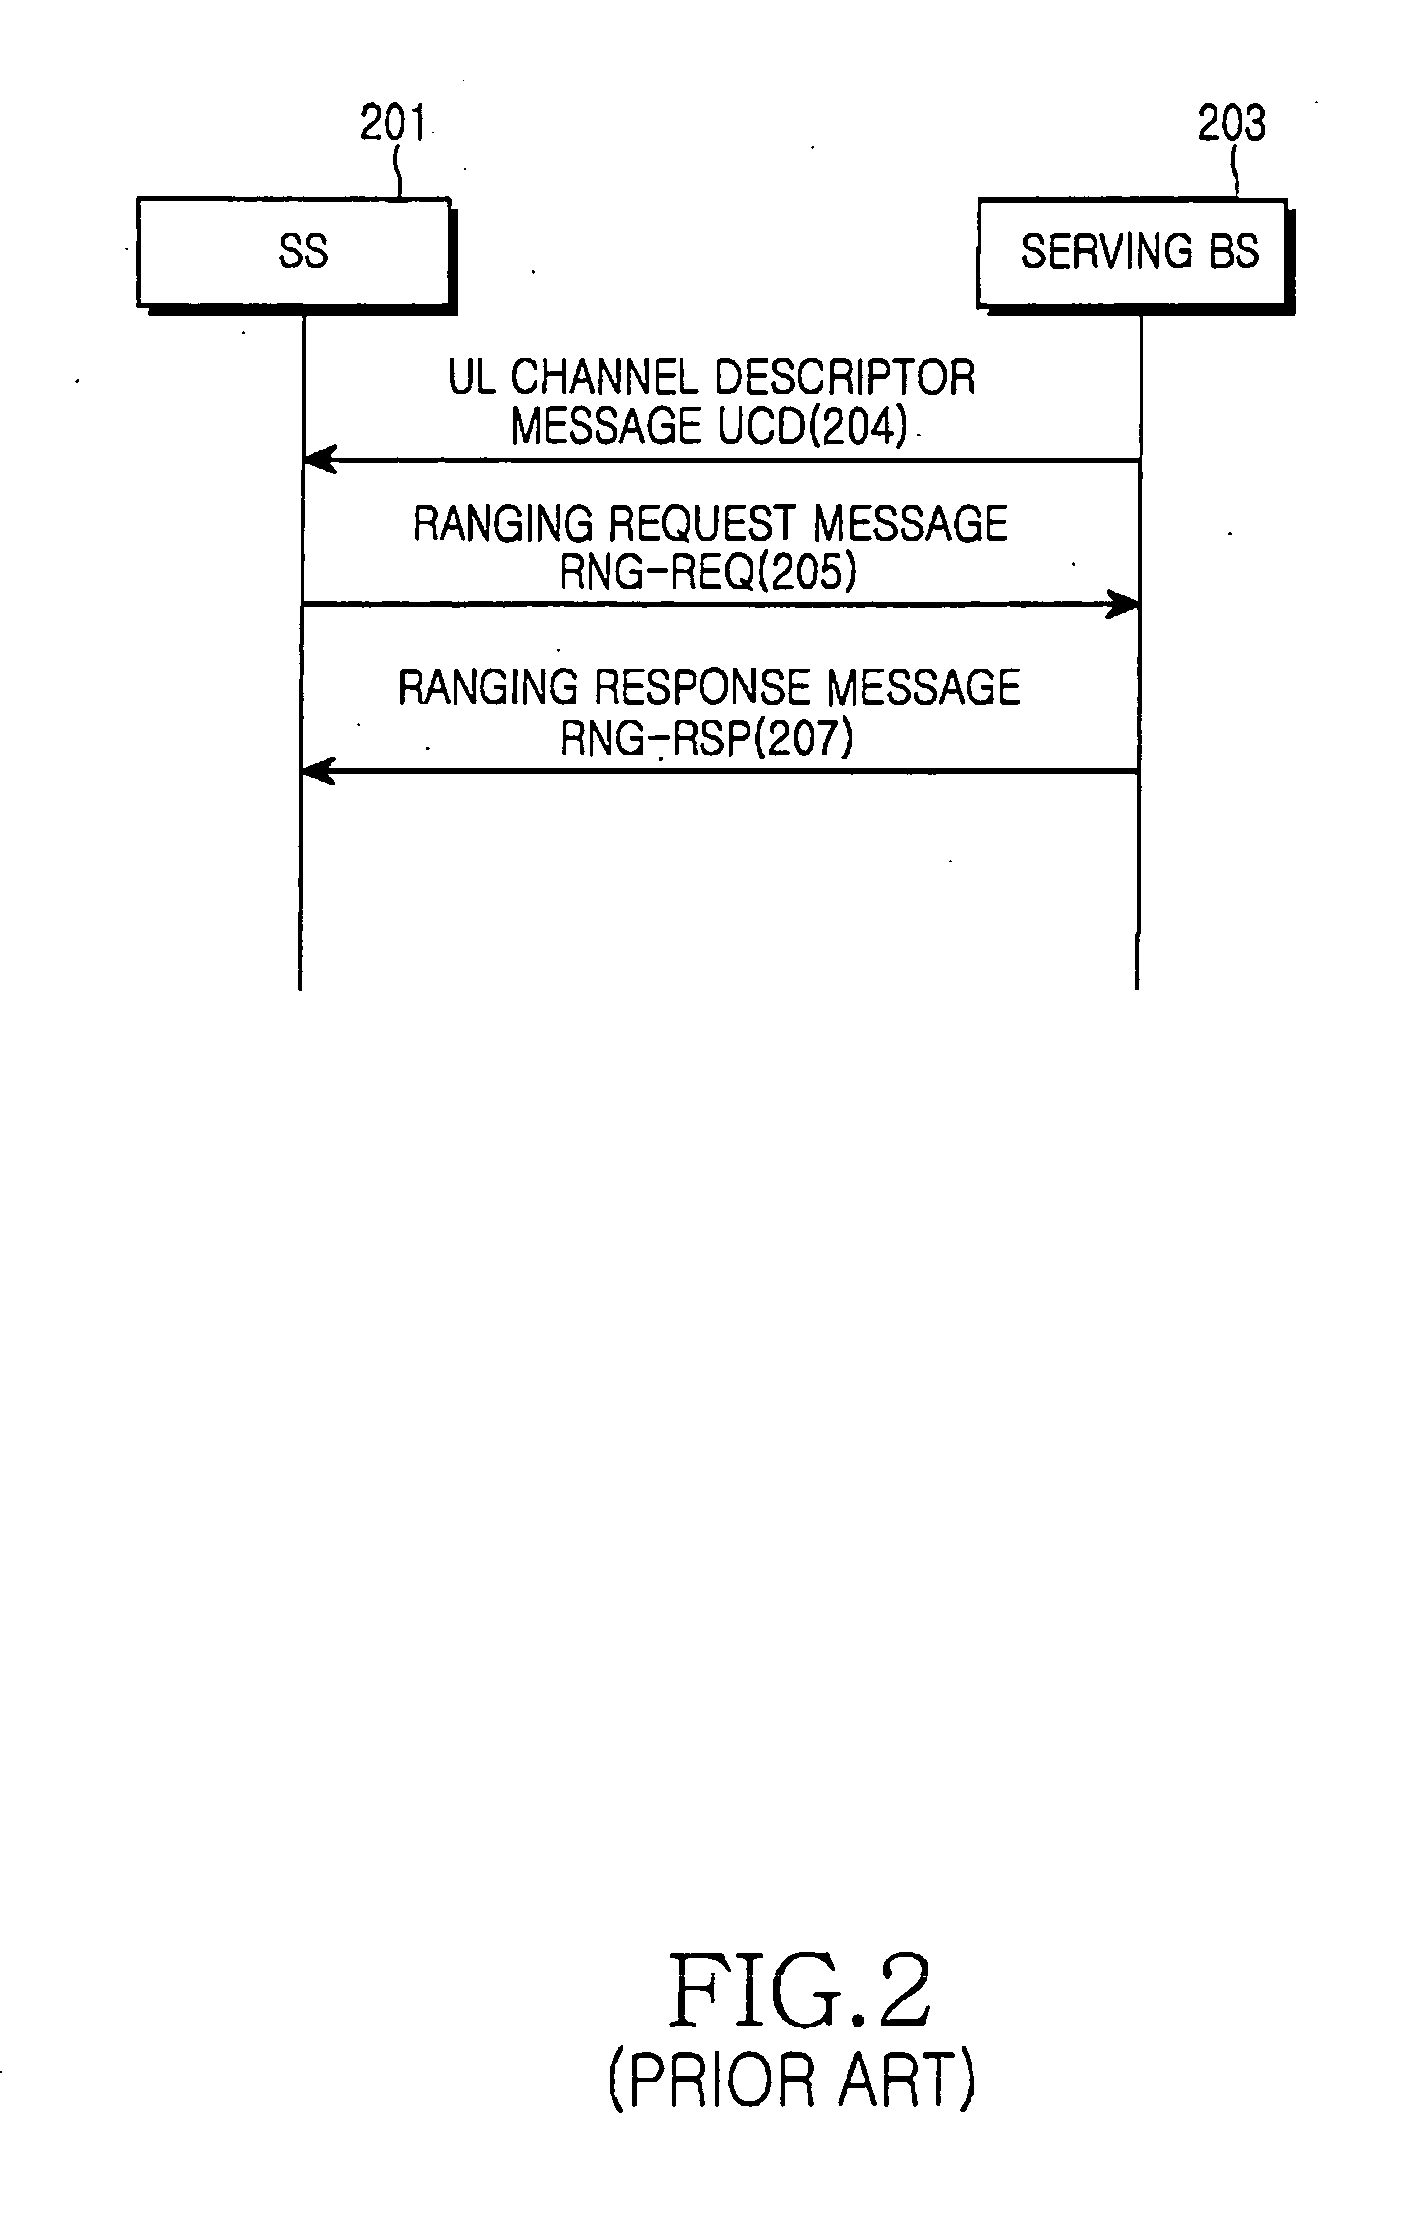 Apparatus and method for relaying ranging messages in multi-hop relay broadband wireless access communication system